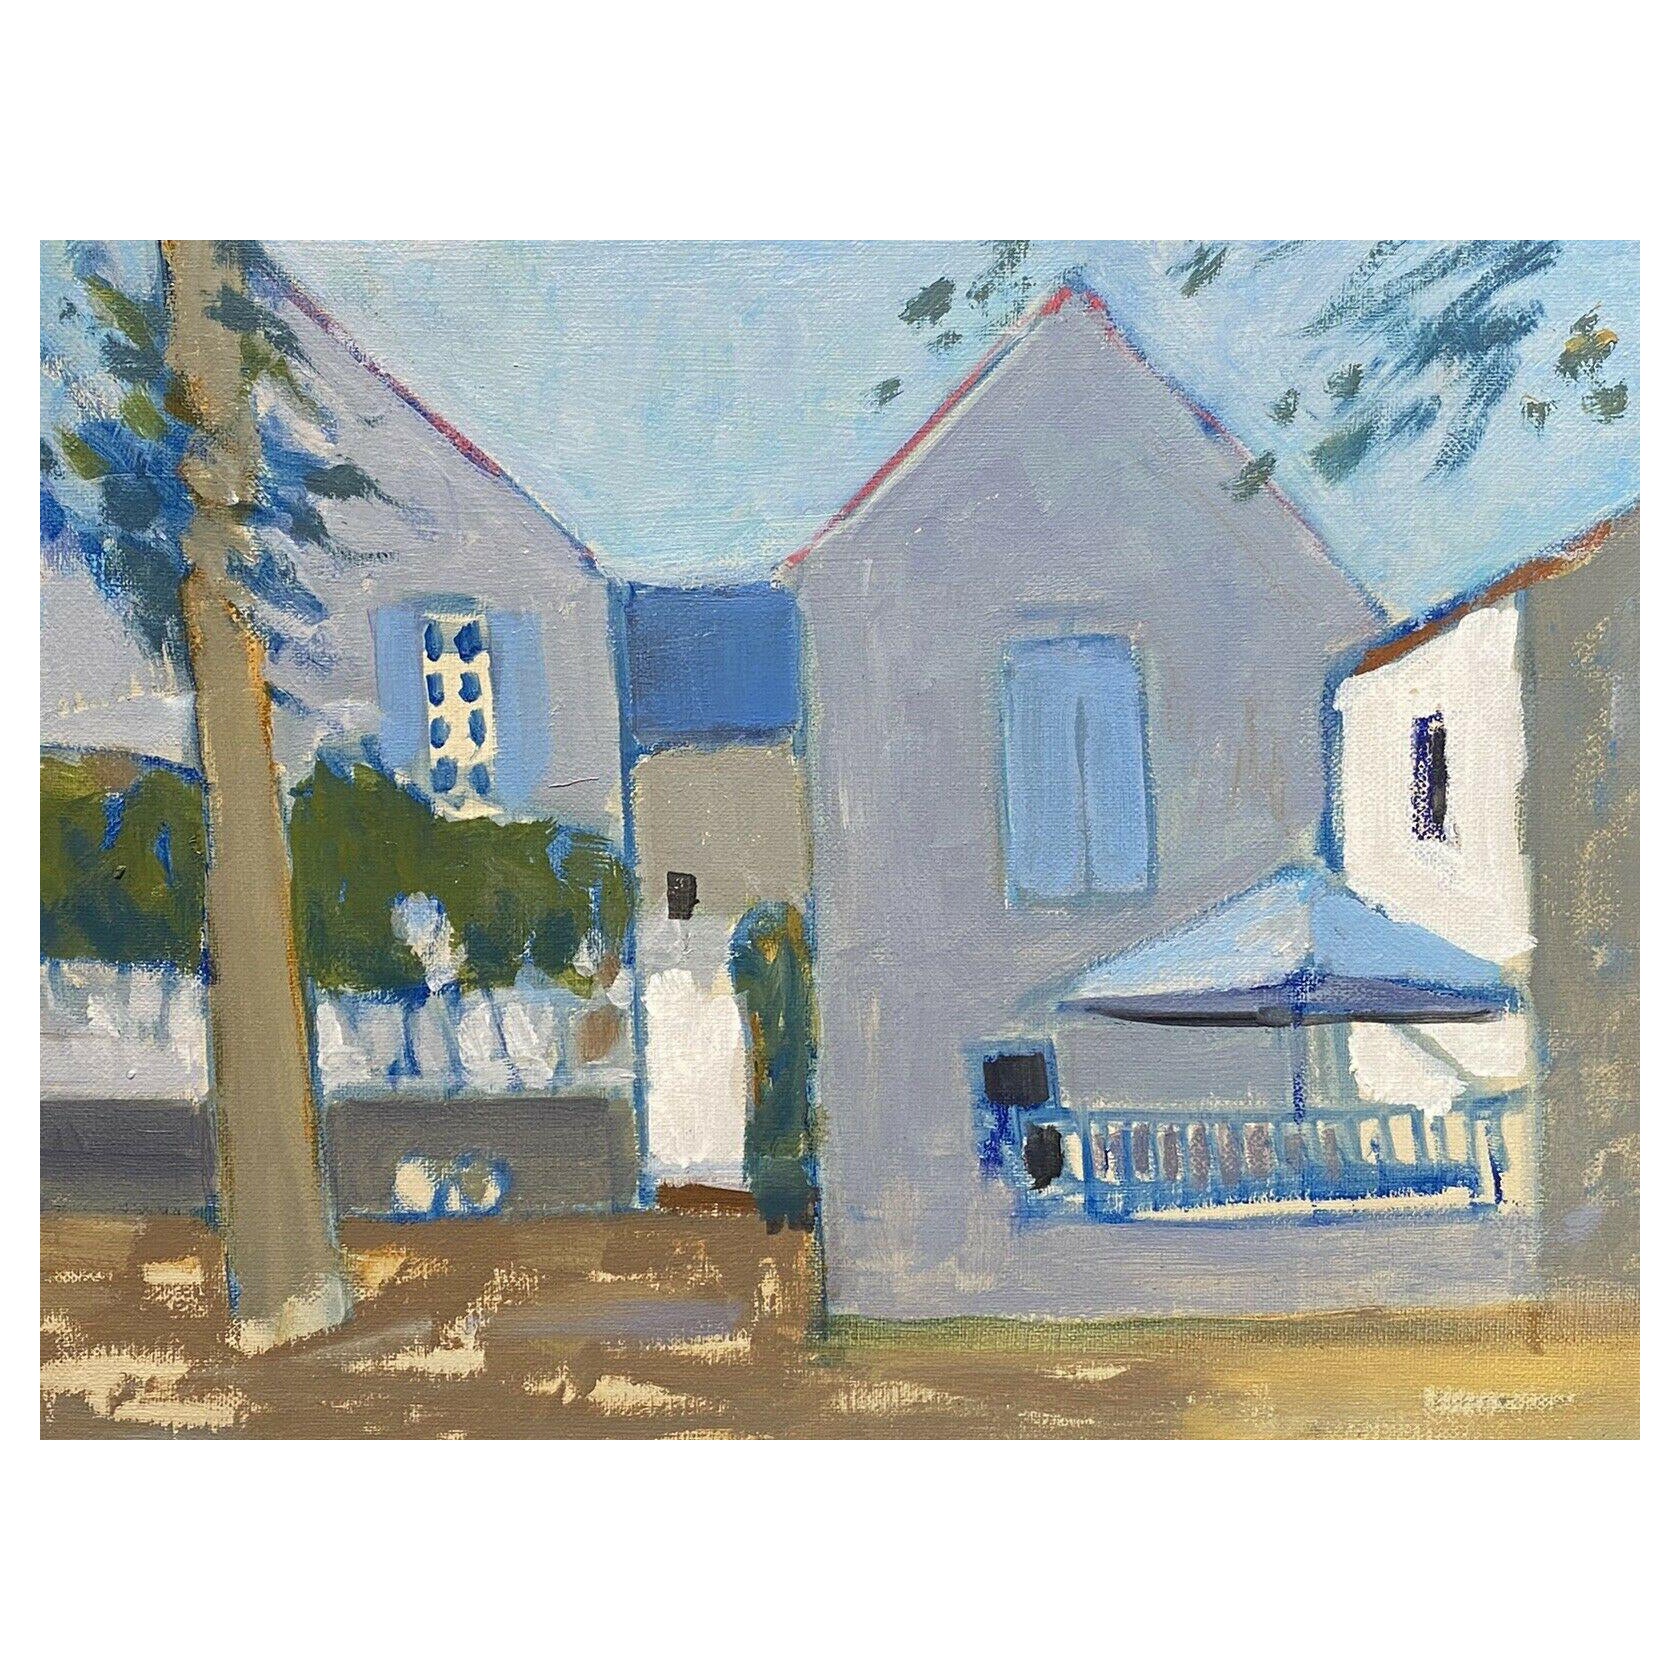 Leroy, French Contemporary Modernist Painting, Village Houses, Muted Colors